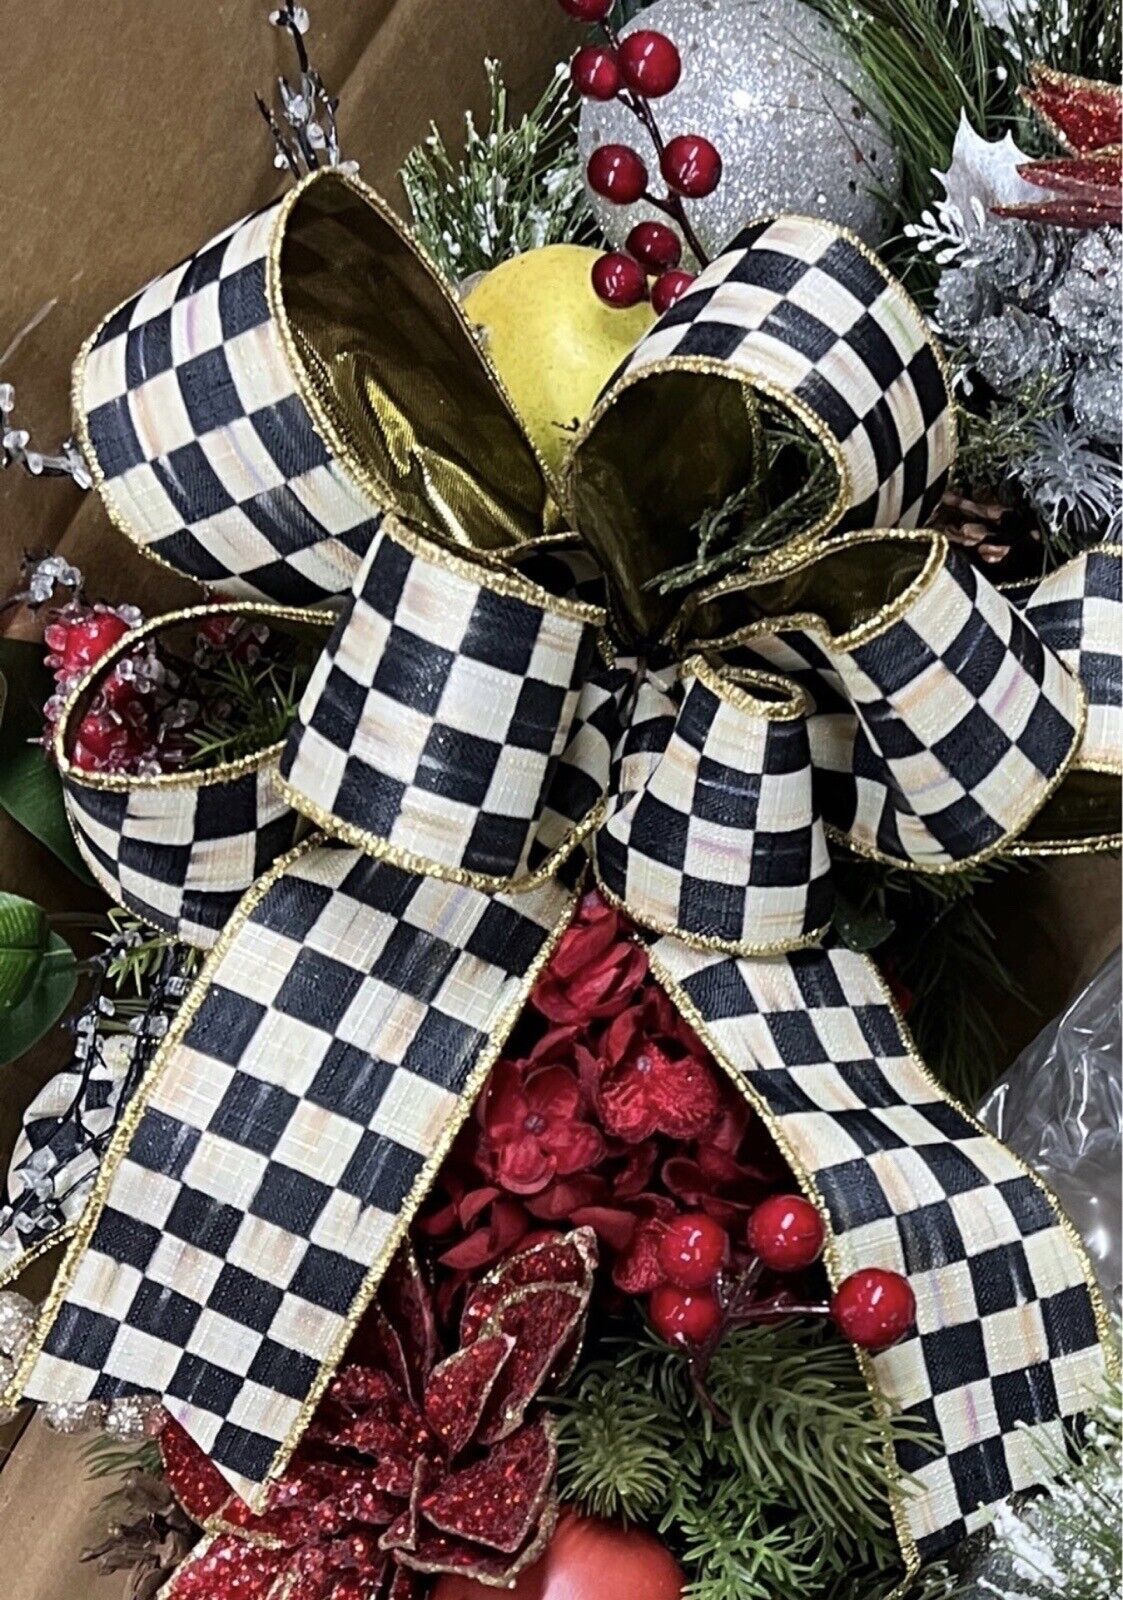 Mackenzie childs courtly check Holiday Bows | Handmade Bows